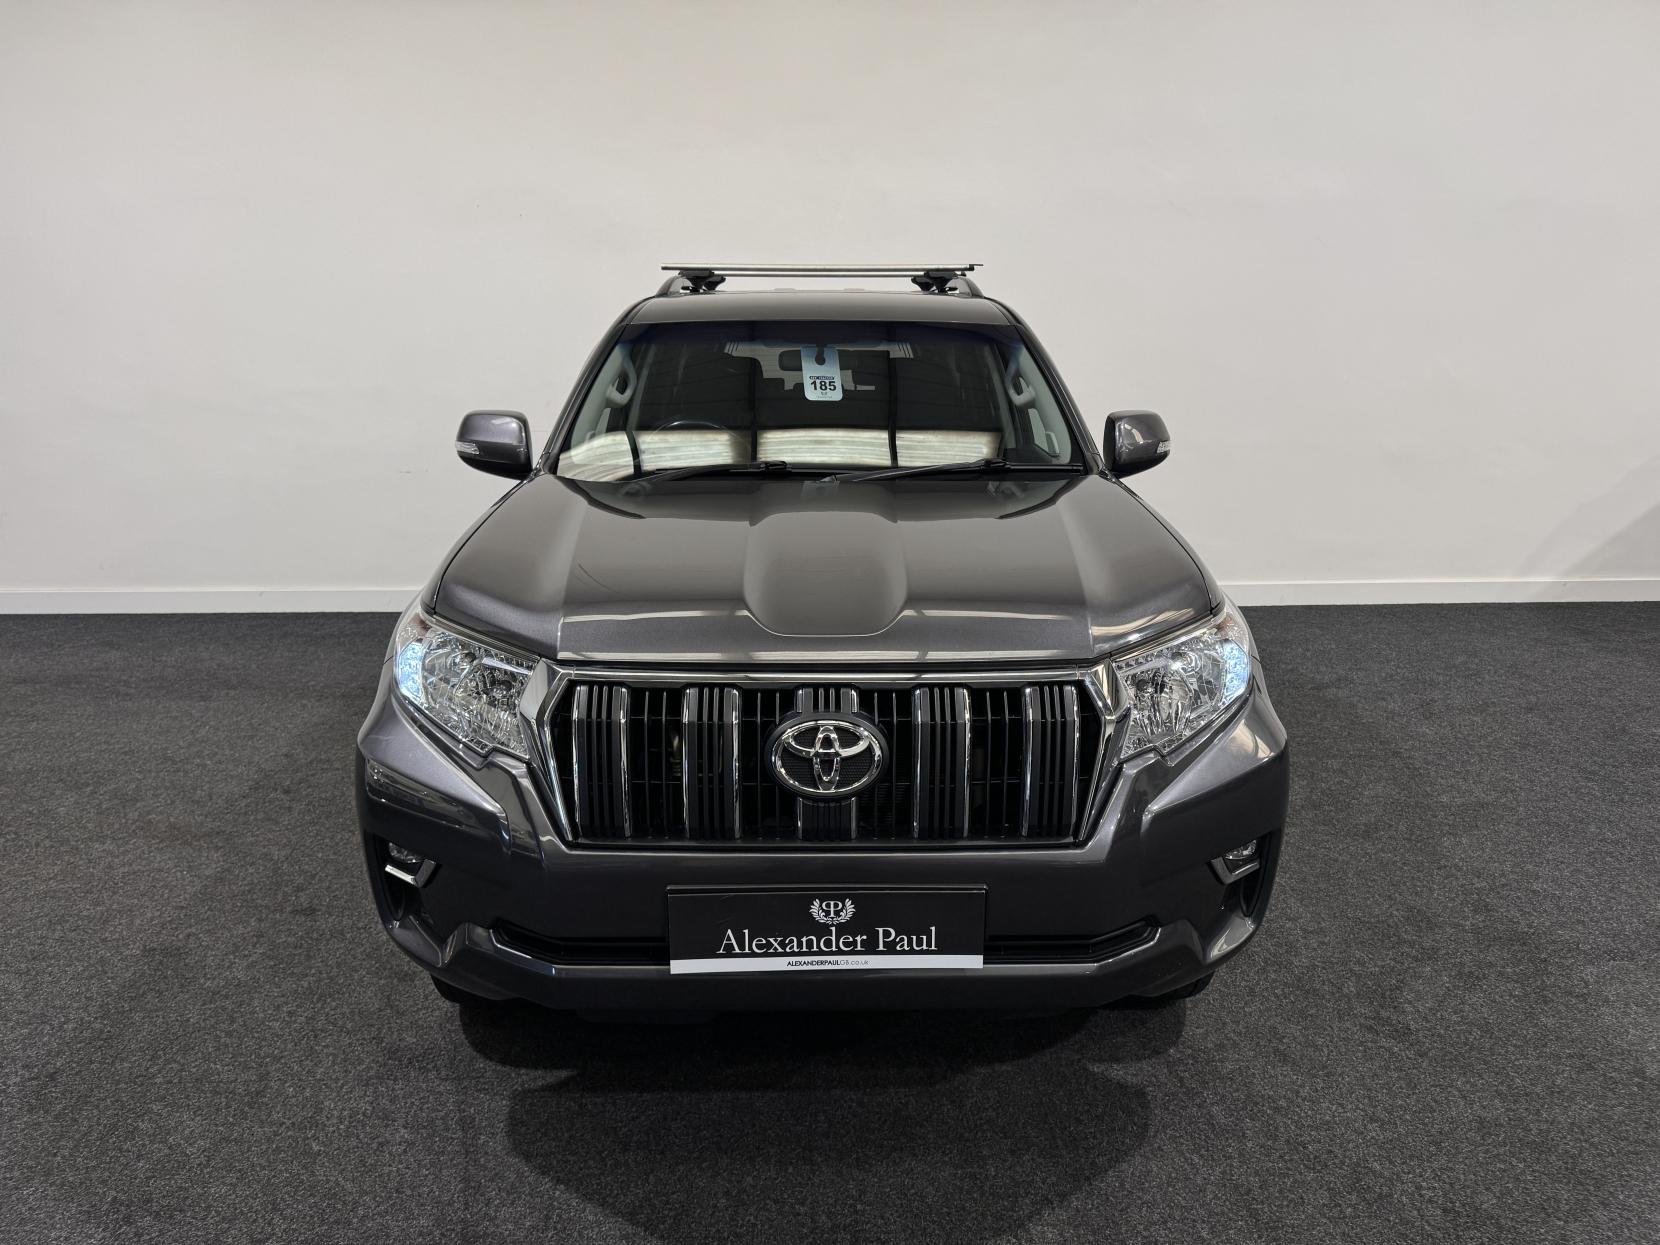 Toyota Land Cruiser 2.8D Active SUV 5dr Diesel Auto 4WD Euro 6 (7 Seat) (177 ps)